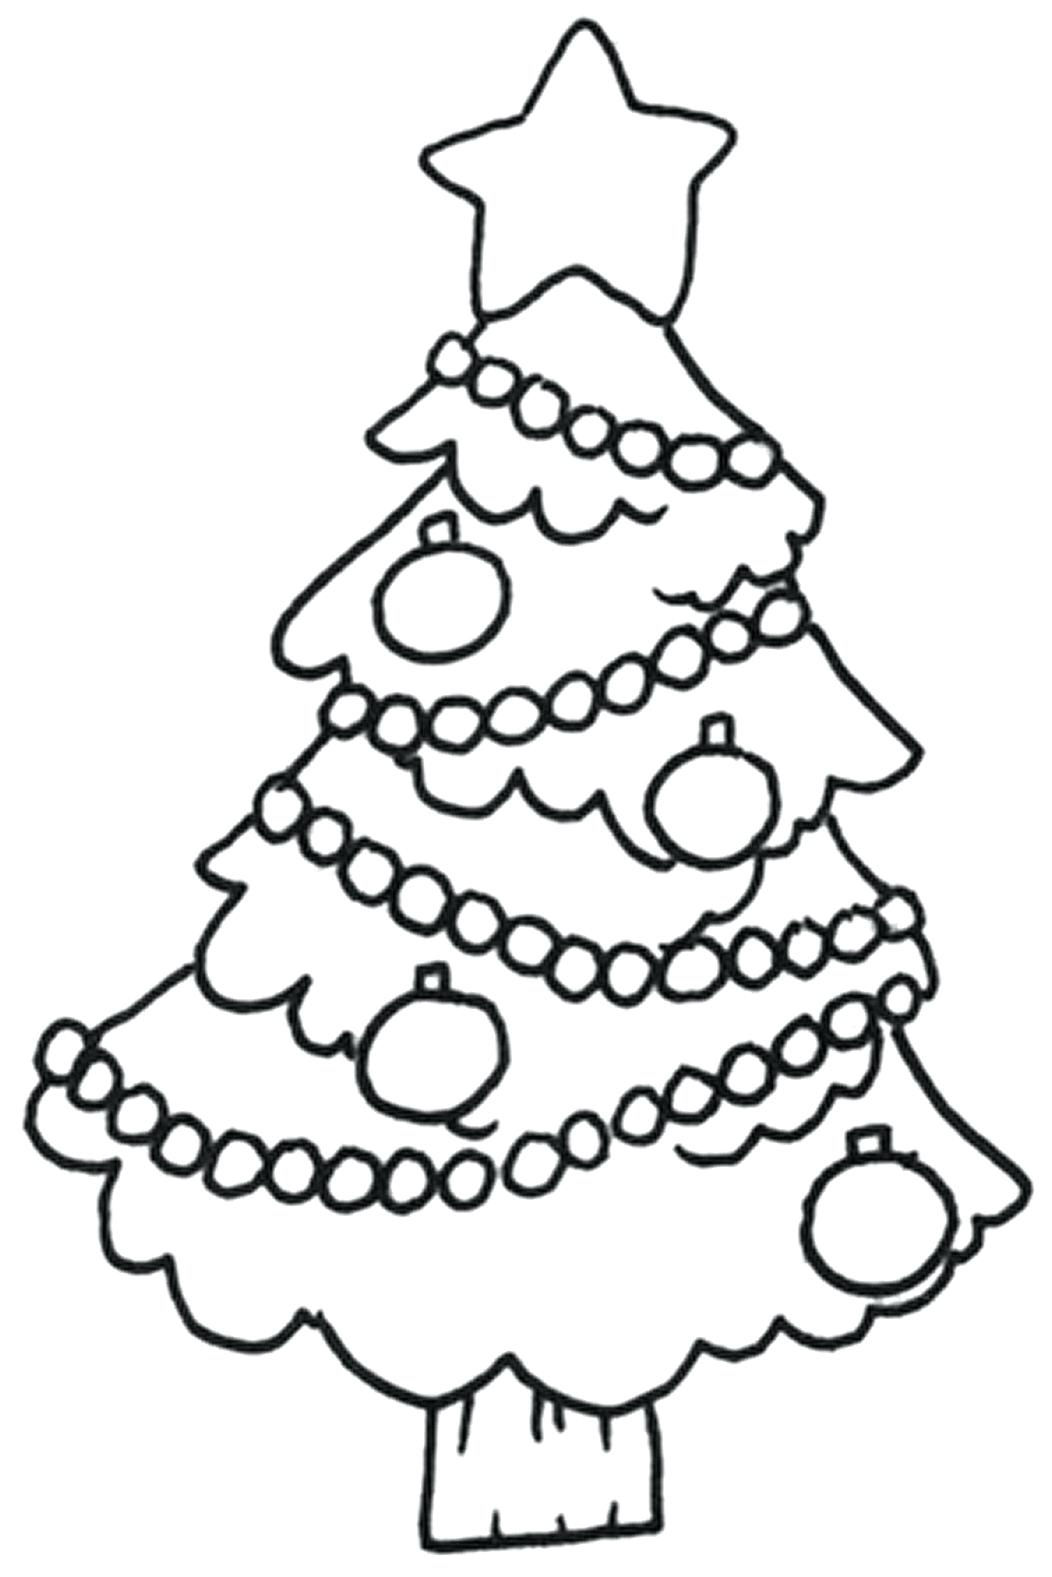 Printable Coloring Pages For Christmas Ornaments. Printable Coloring - Free Printable Christmas Tree Ornaments To Color